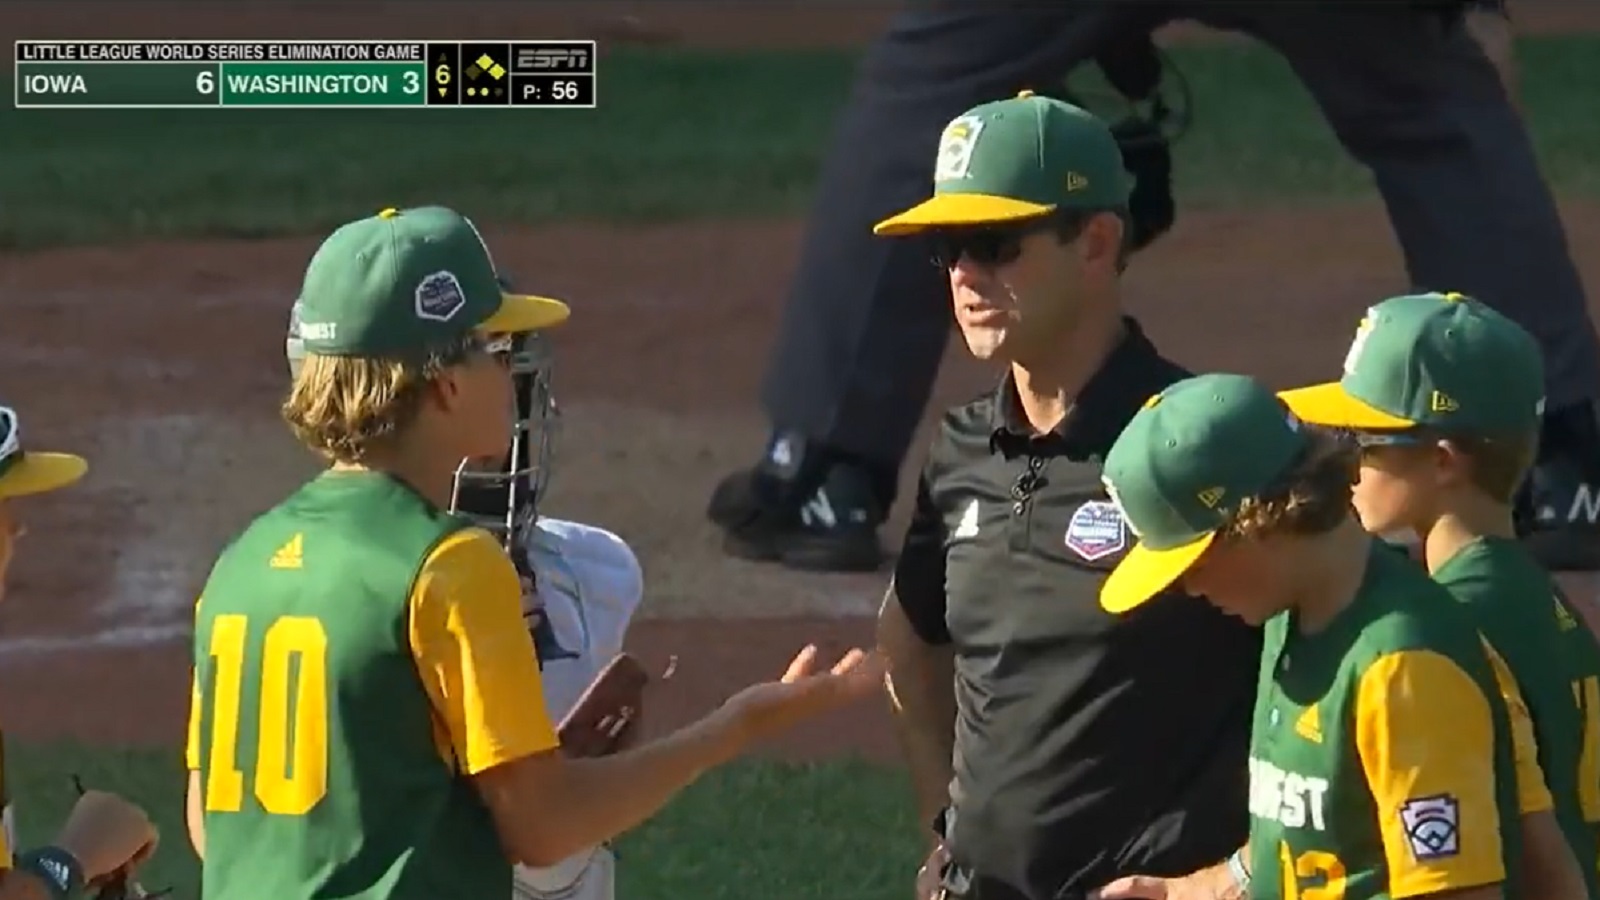 Little League World Series: Iowa's Grandview eliminated by